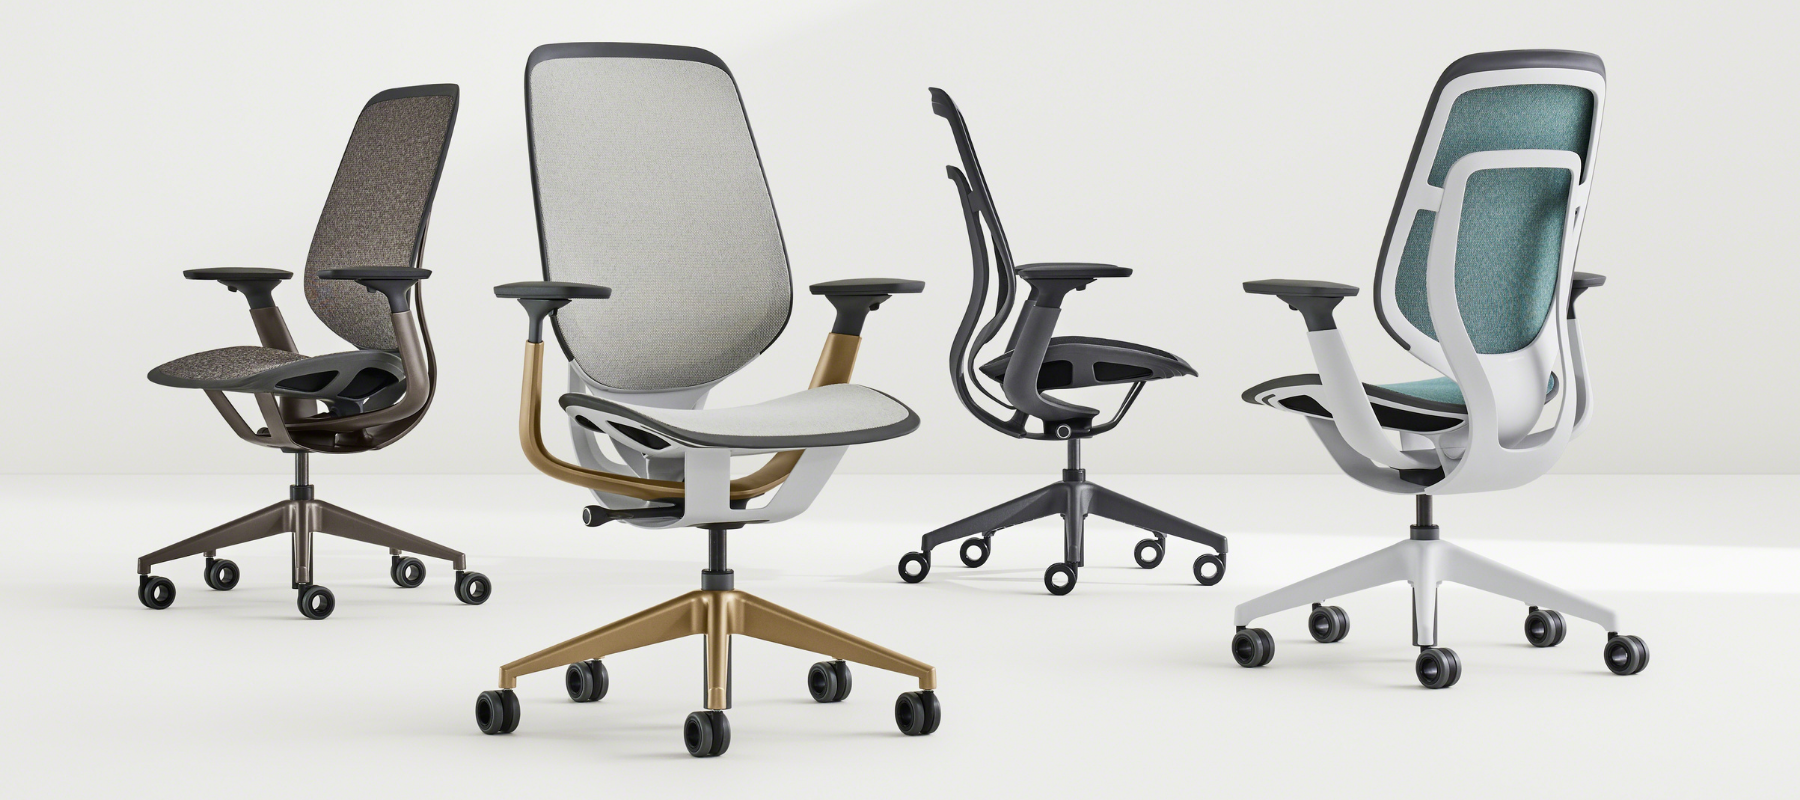 Variety of mesh task chairs on a grey background, with different finishes